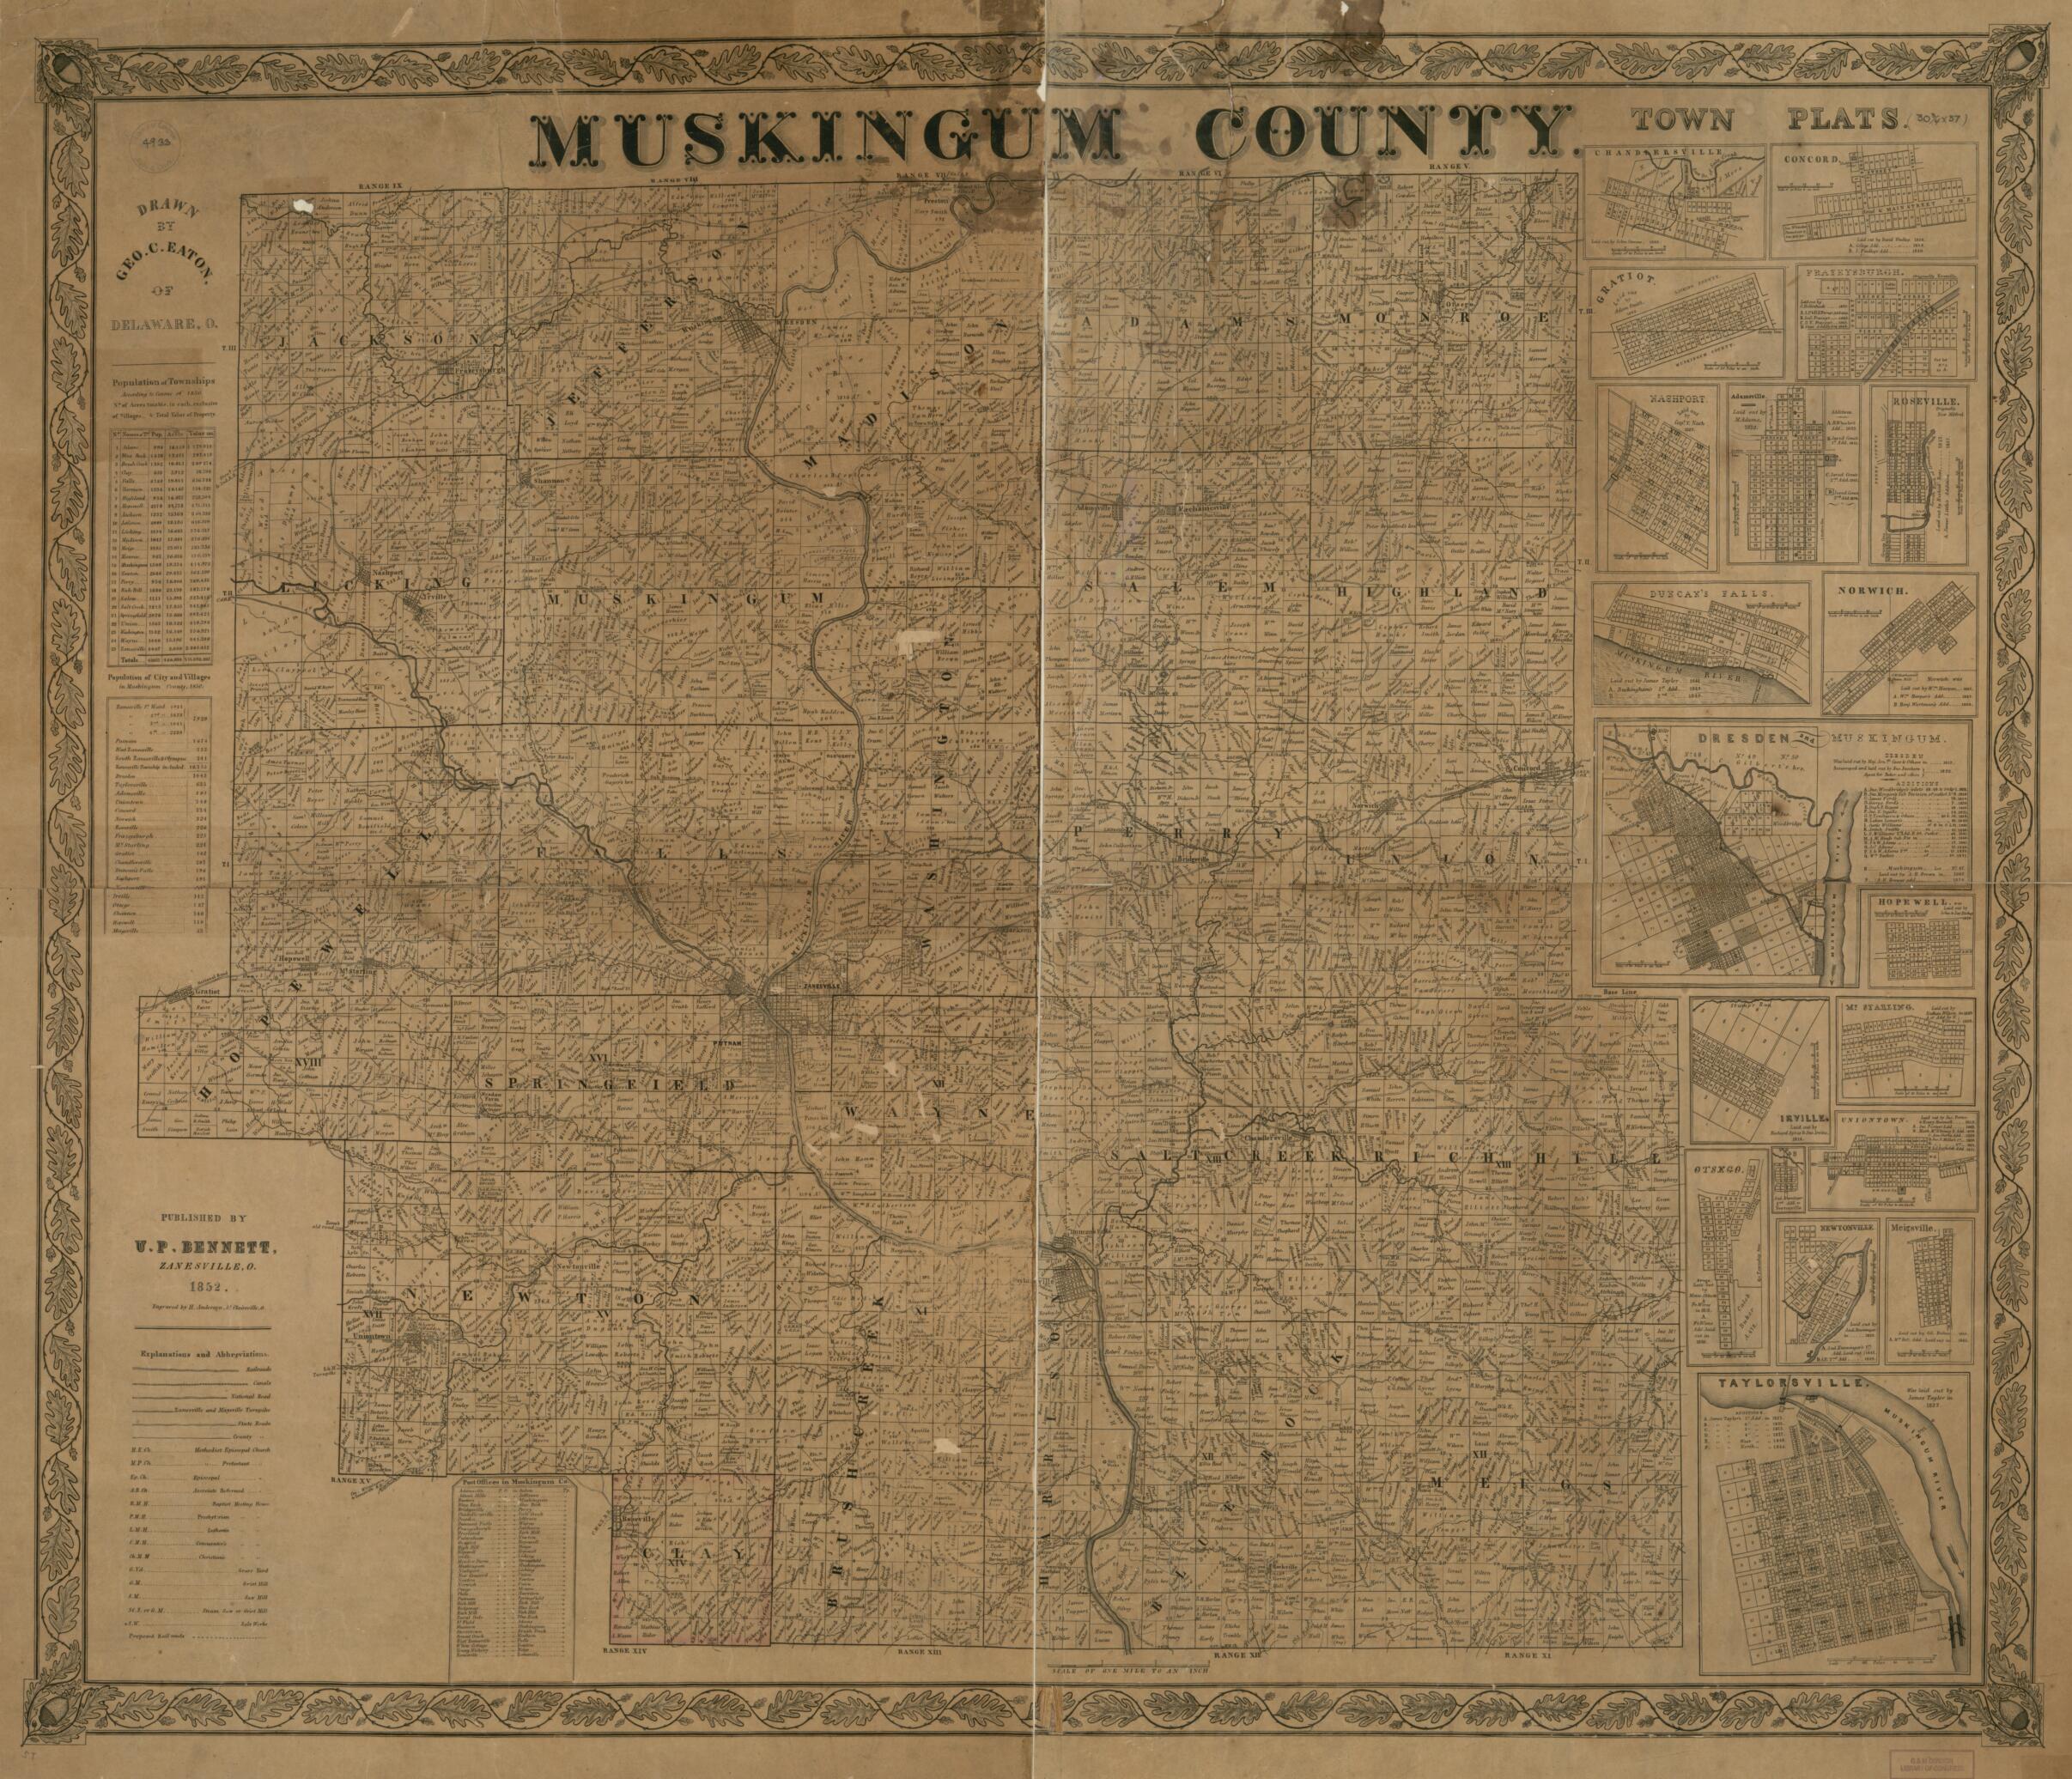 This old map of Map of Muskingum County from 1852 was created by Uriah P. Bennett, Geo. C. Eaton in 1852